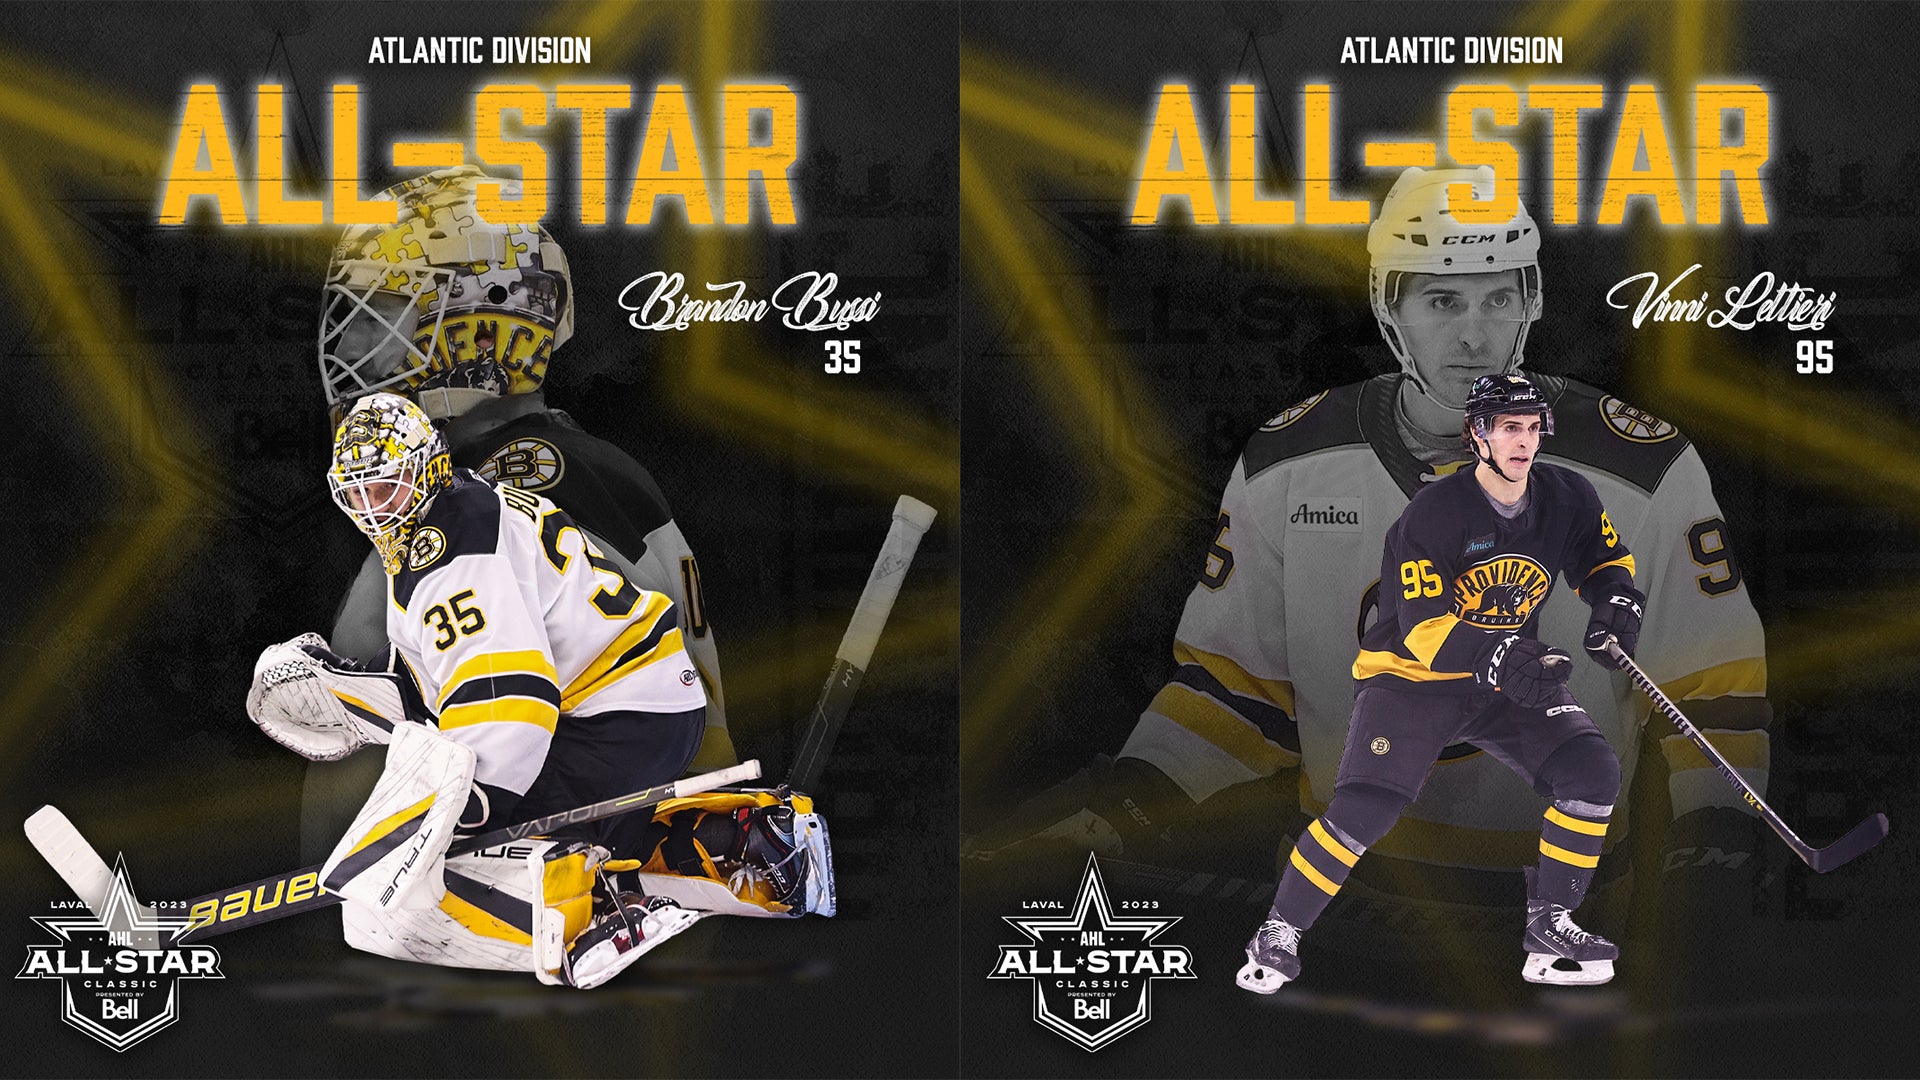 THREE P-BRUINS NAMED TO ATLANTIC DIVISION ALL-STAR TEAM